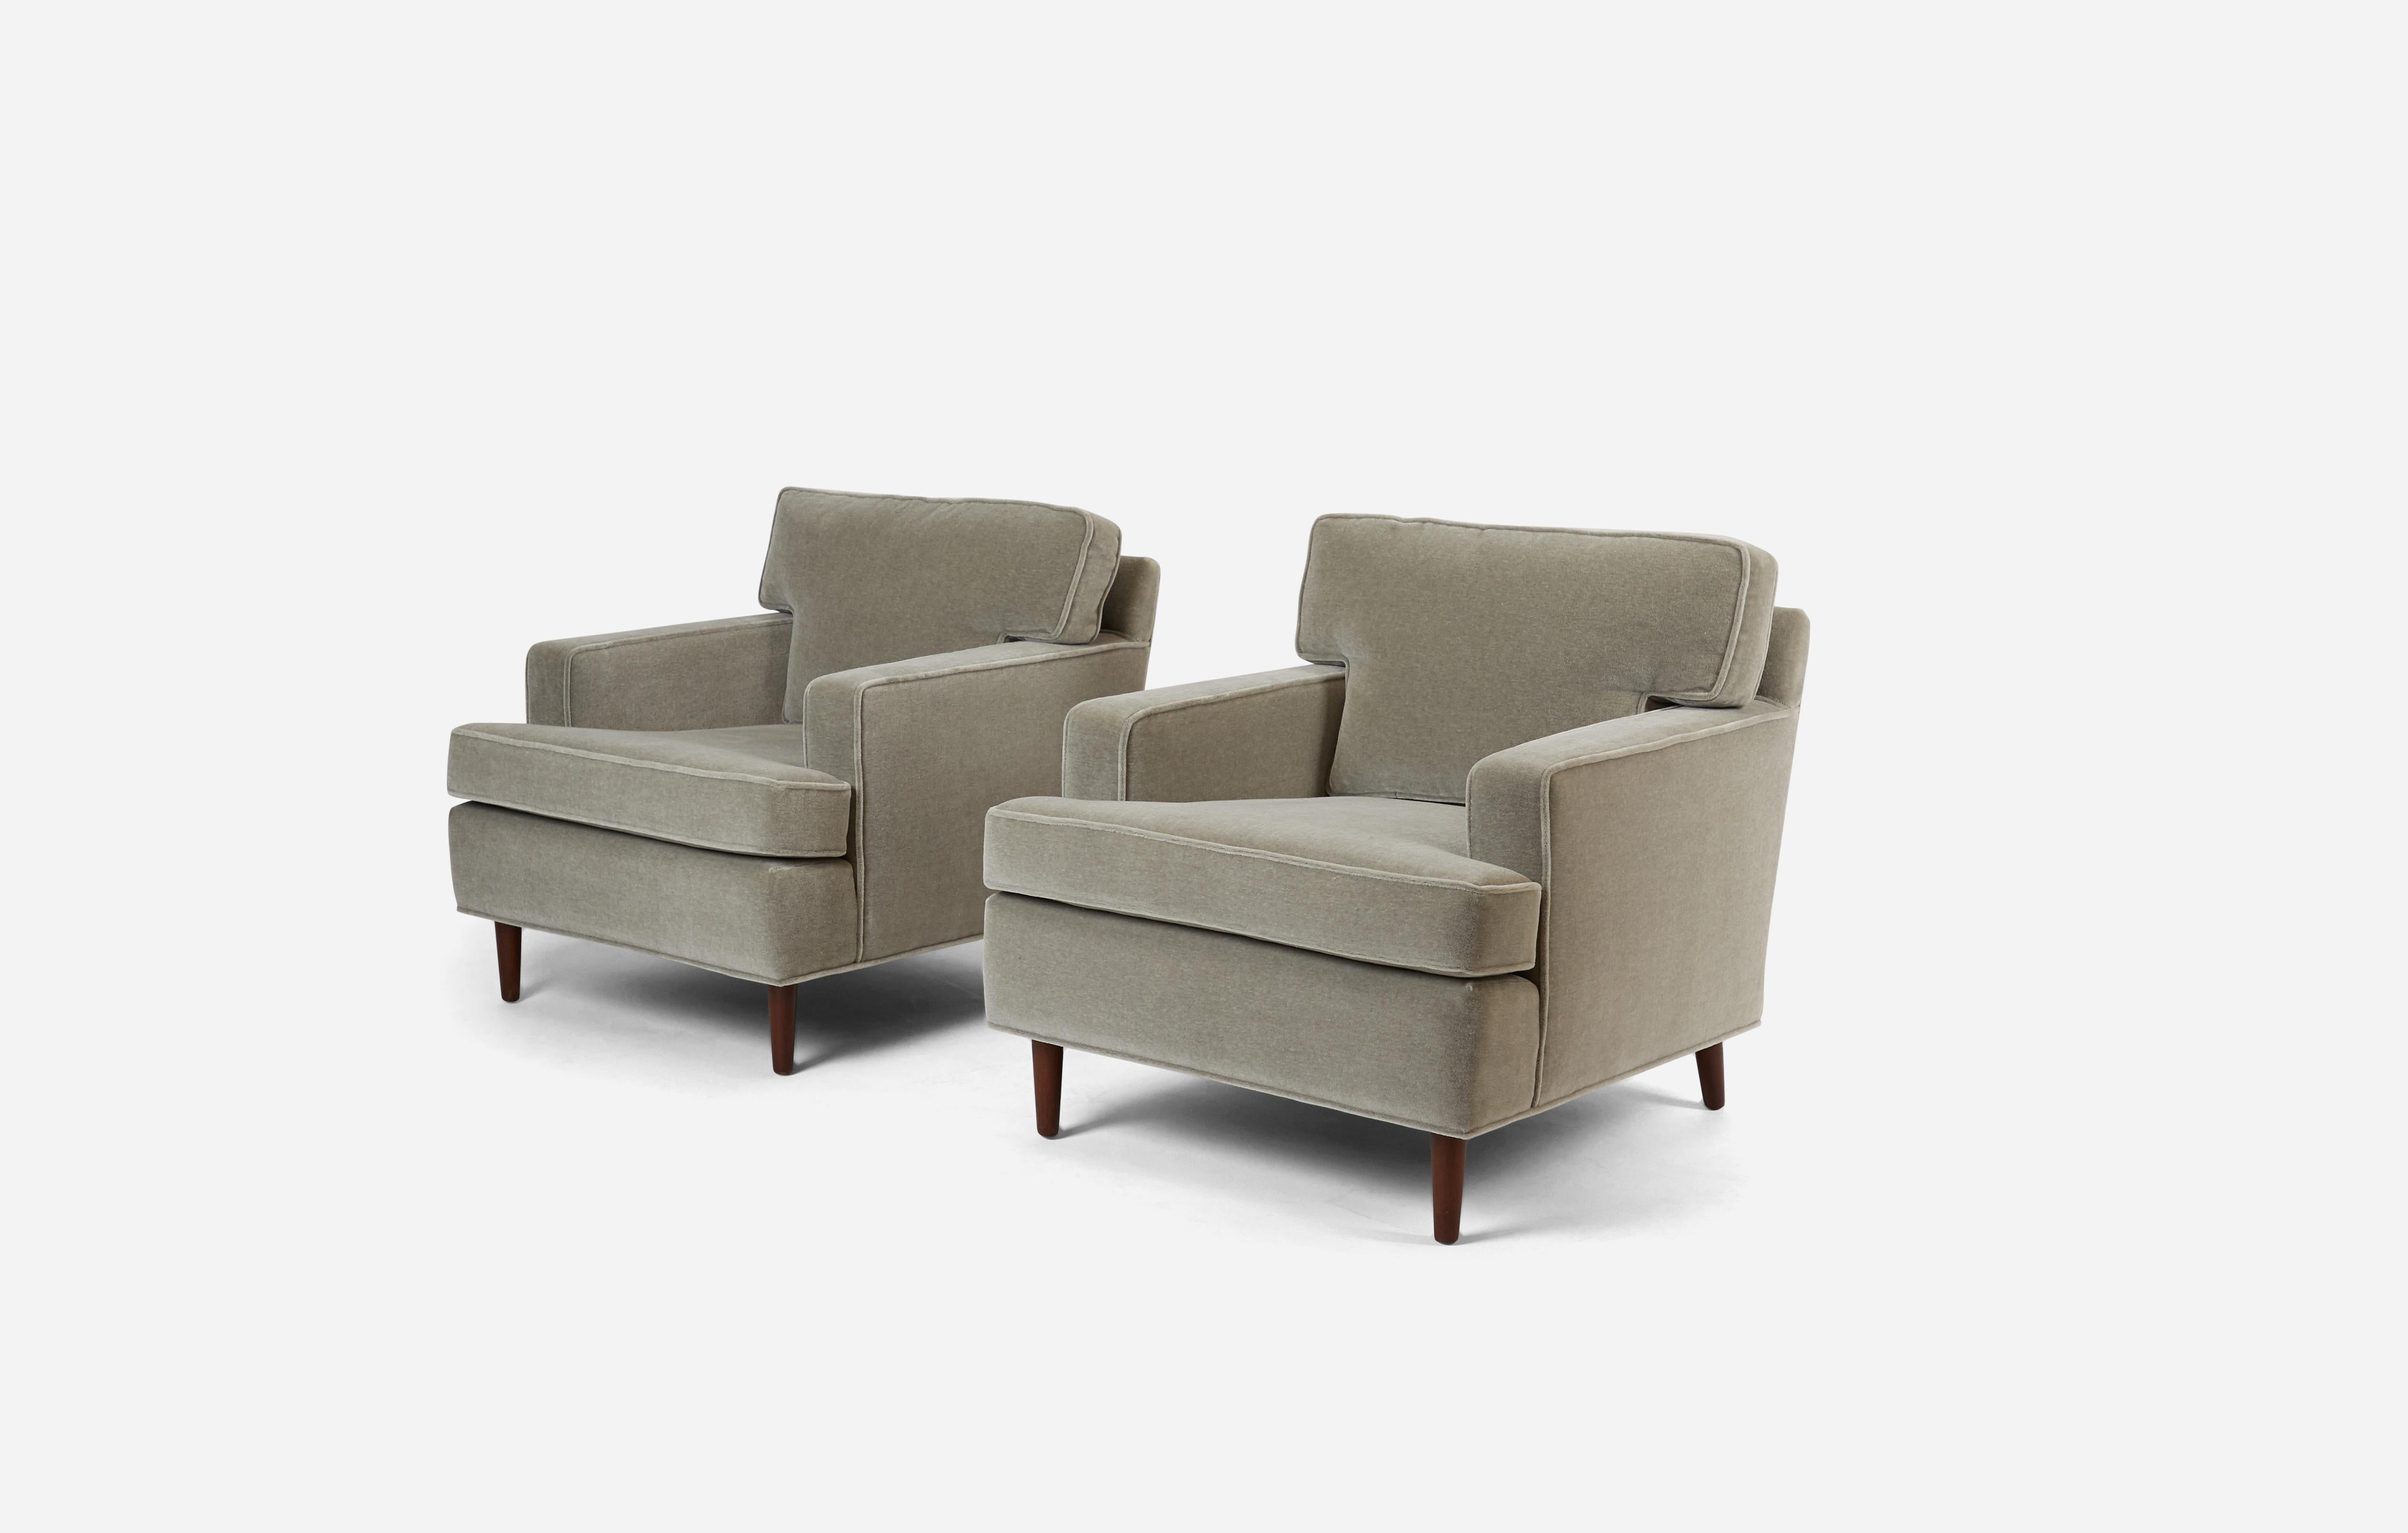 Mid-Century Modern Pair of Lounge Chairs by Edward Wormley for Dunbar